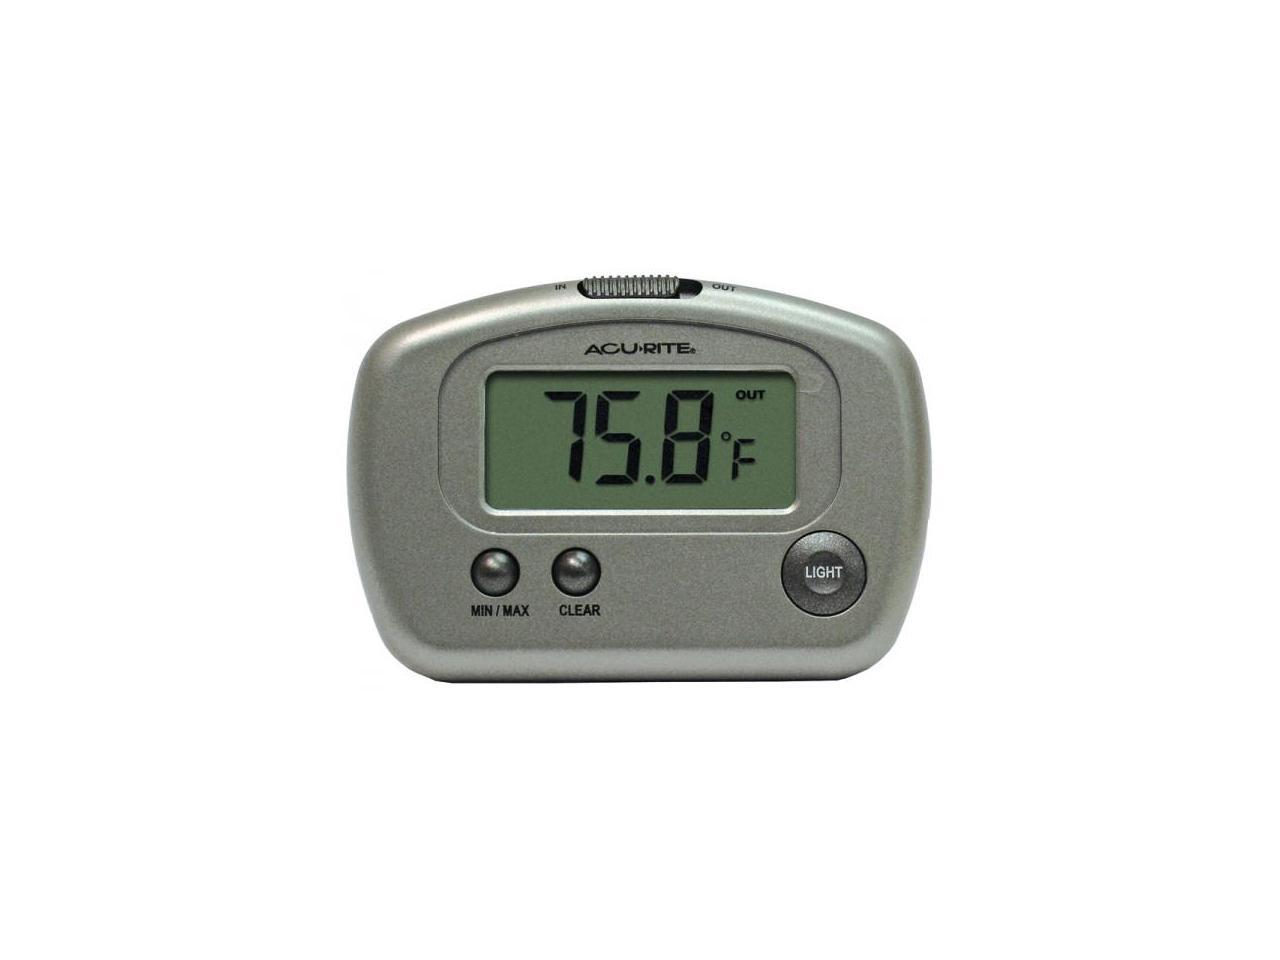 ACU-RITE AcuRite 00888A2 Indoor/Outdoor Digital Thermometer - Newegg.com